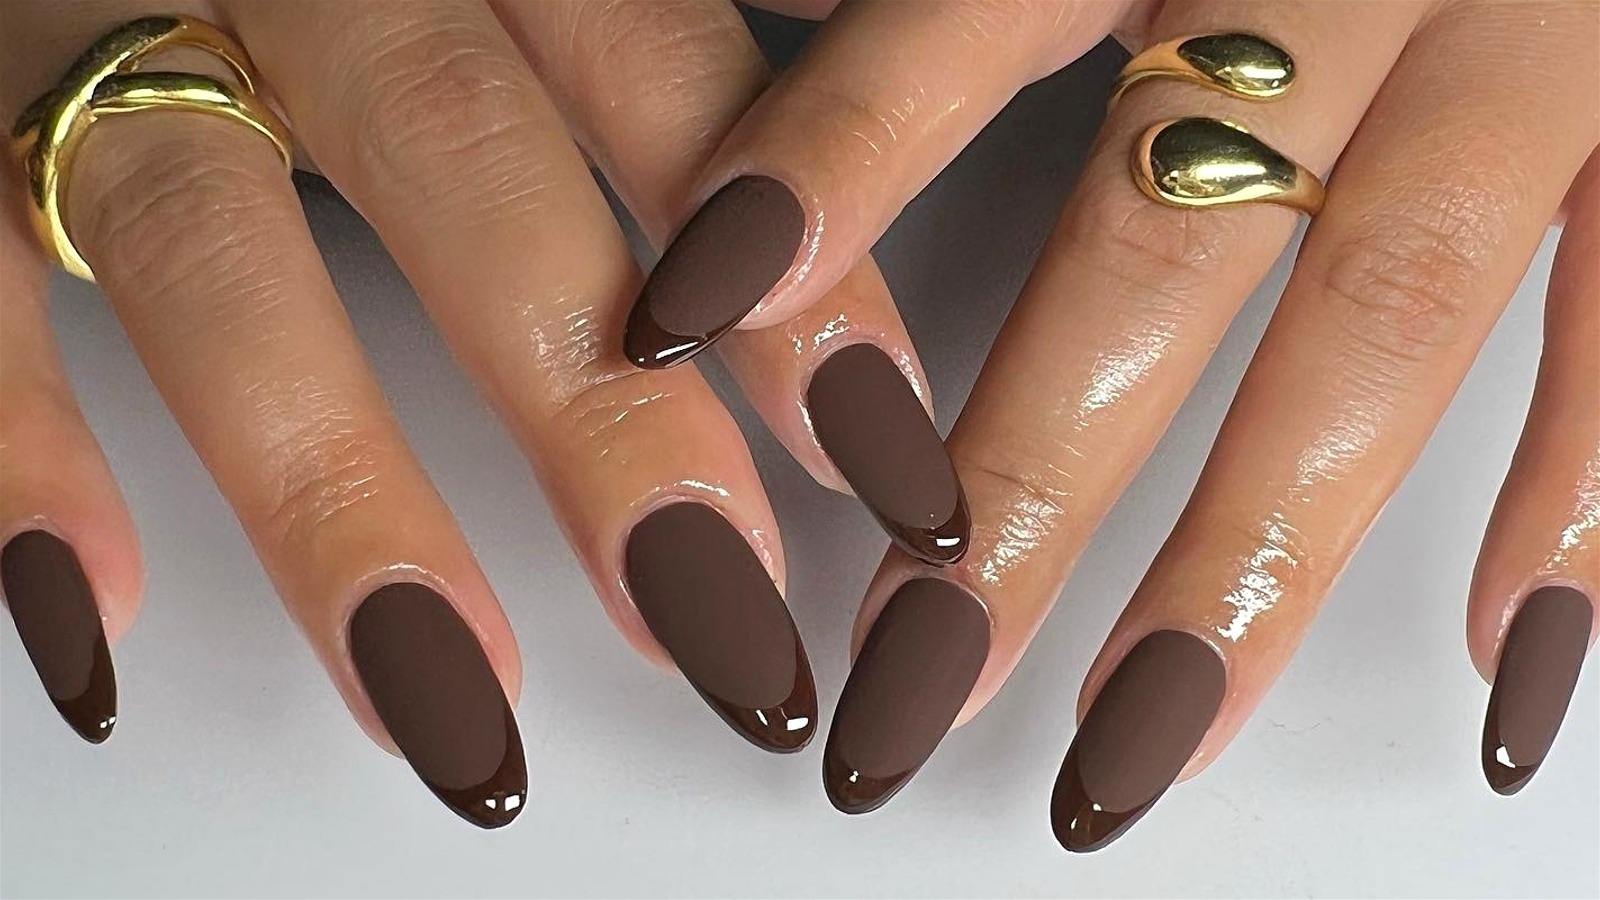 CND - Creative Nail Design - These chocolate brown nails using CND shade  Fedora have us craving hot chocolate. What is your favorite holiday treat?  ☕🍫 @taraheriford.cnd . Shade available in CND